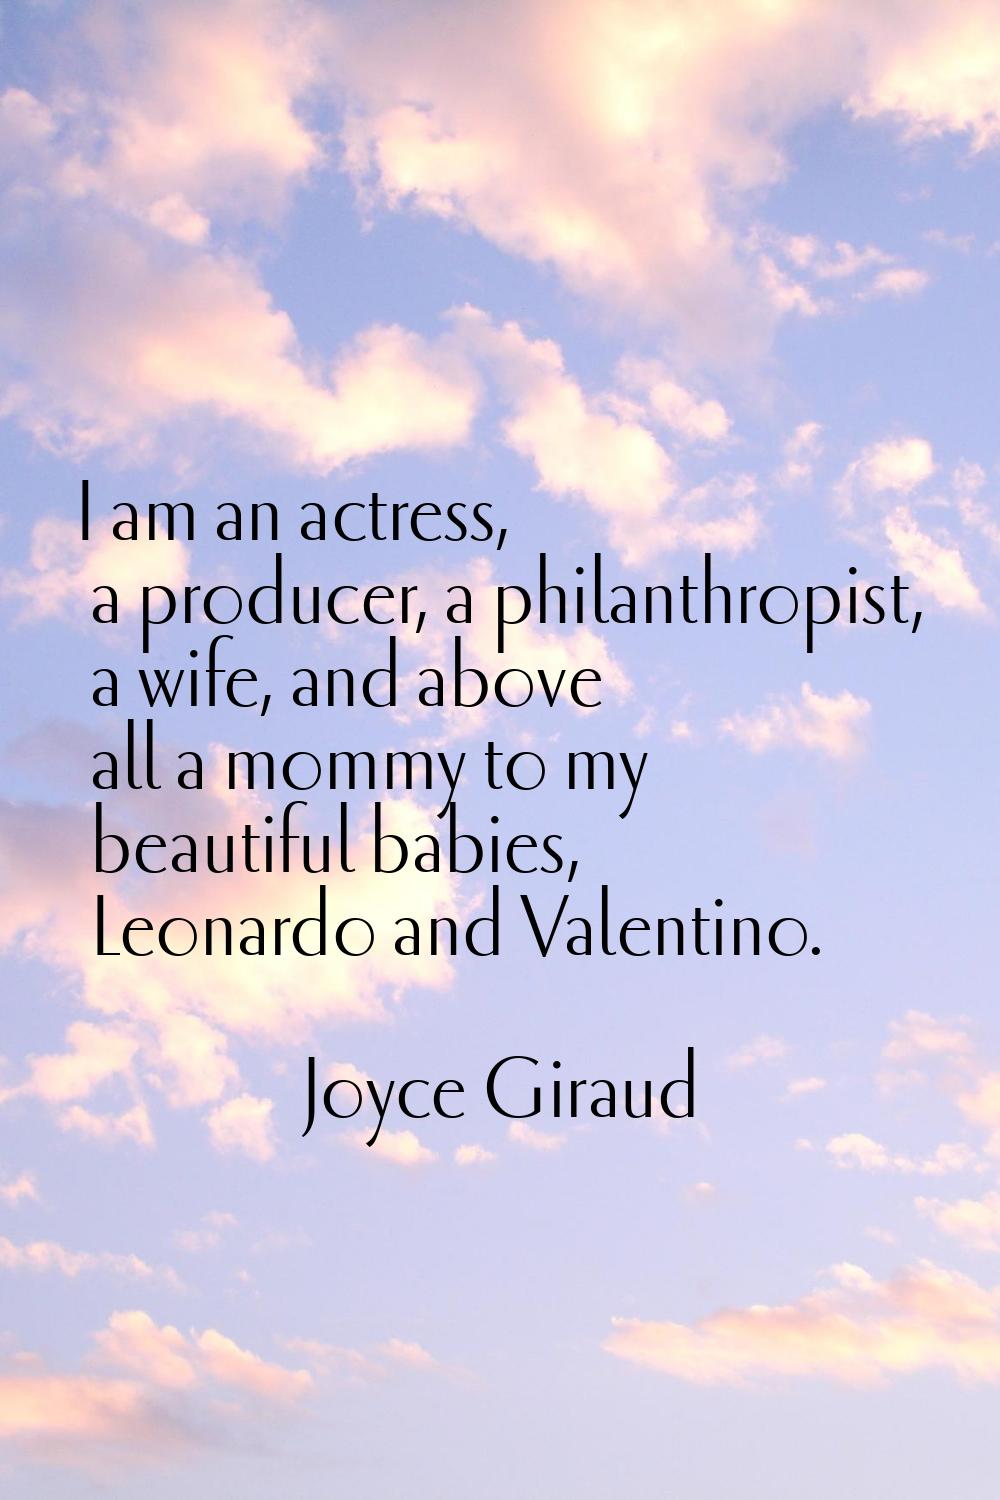 I am an actress, a producer, a philanthropist, a wife, and above all a mommy to my beautiful babies